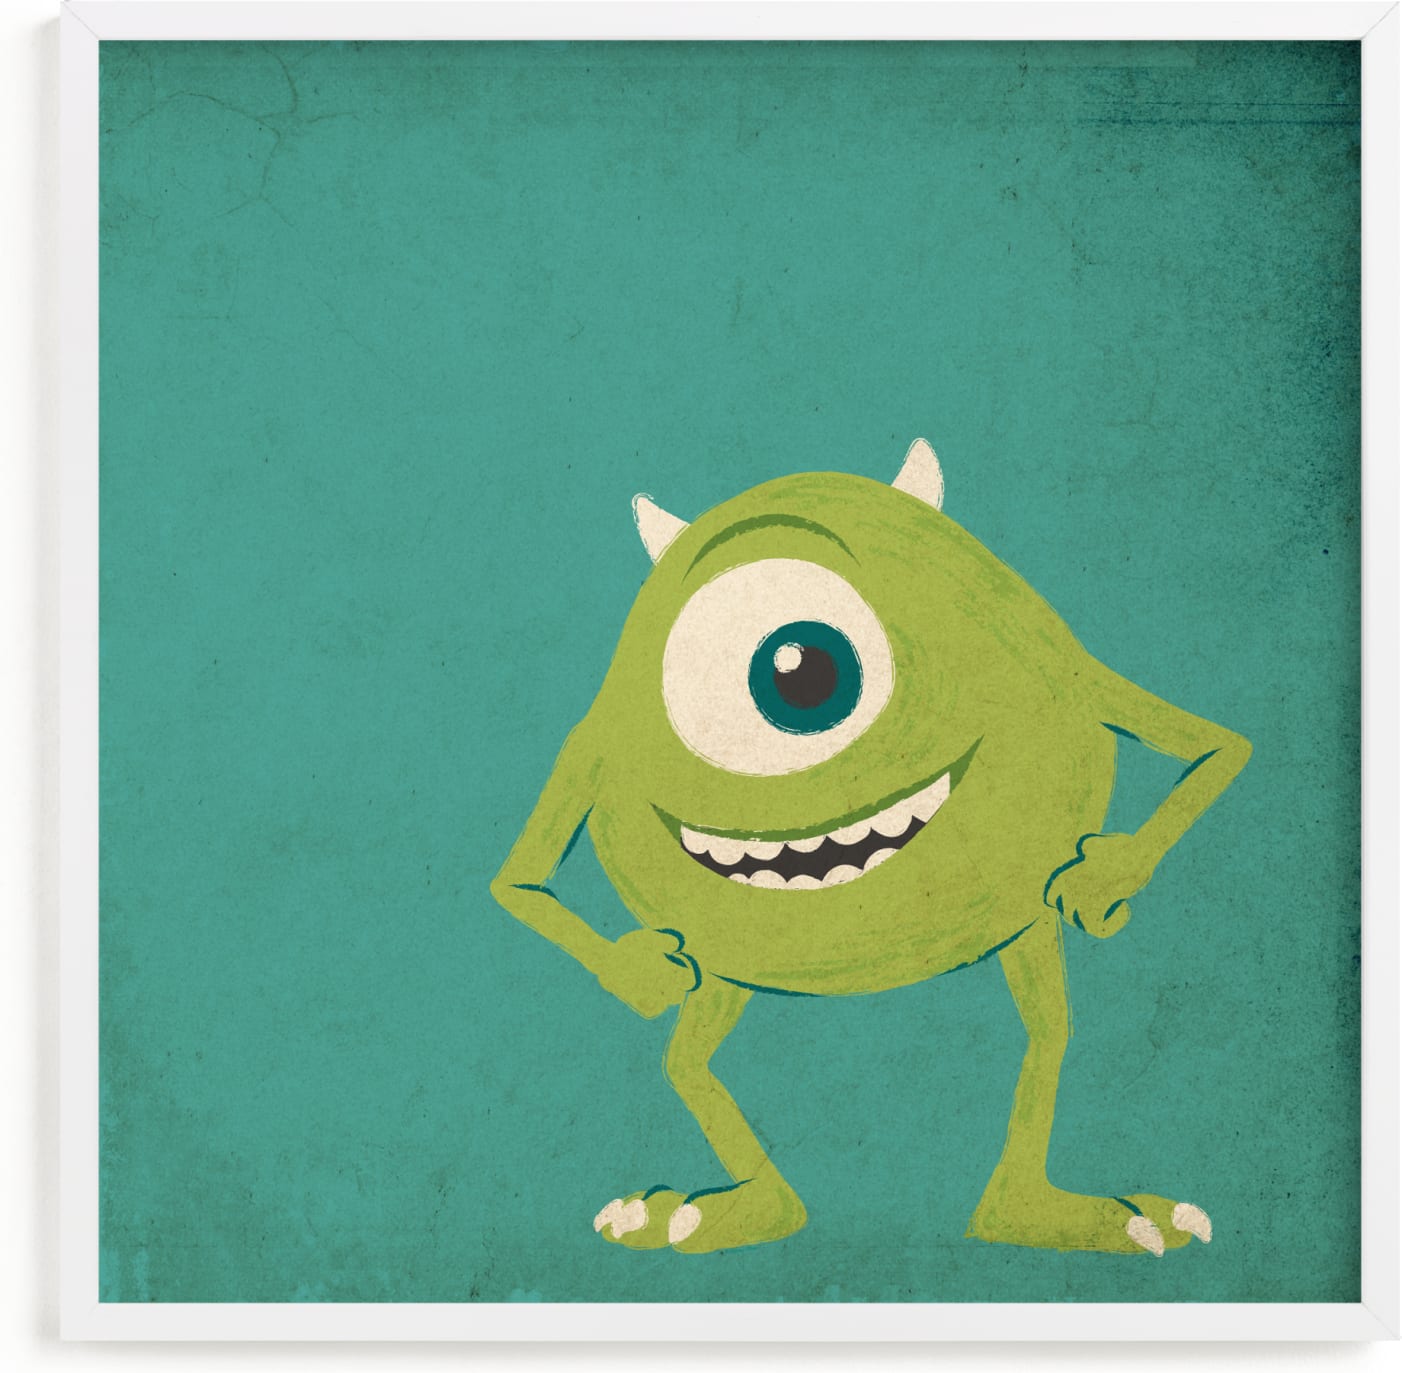 This is a green disney art by Kiersten Garner called Mike from Disney and Pixar's Monster's Inc.